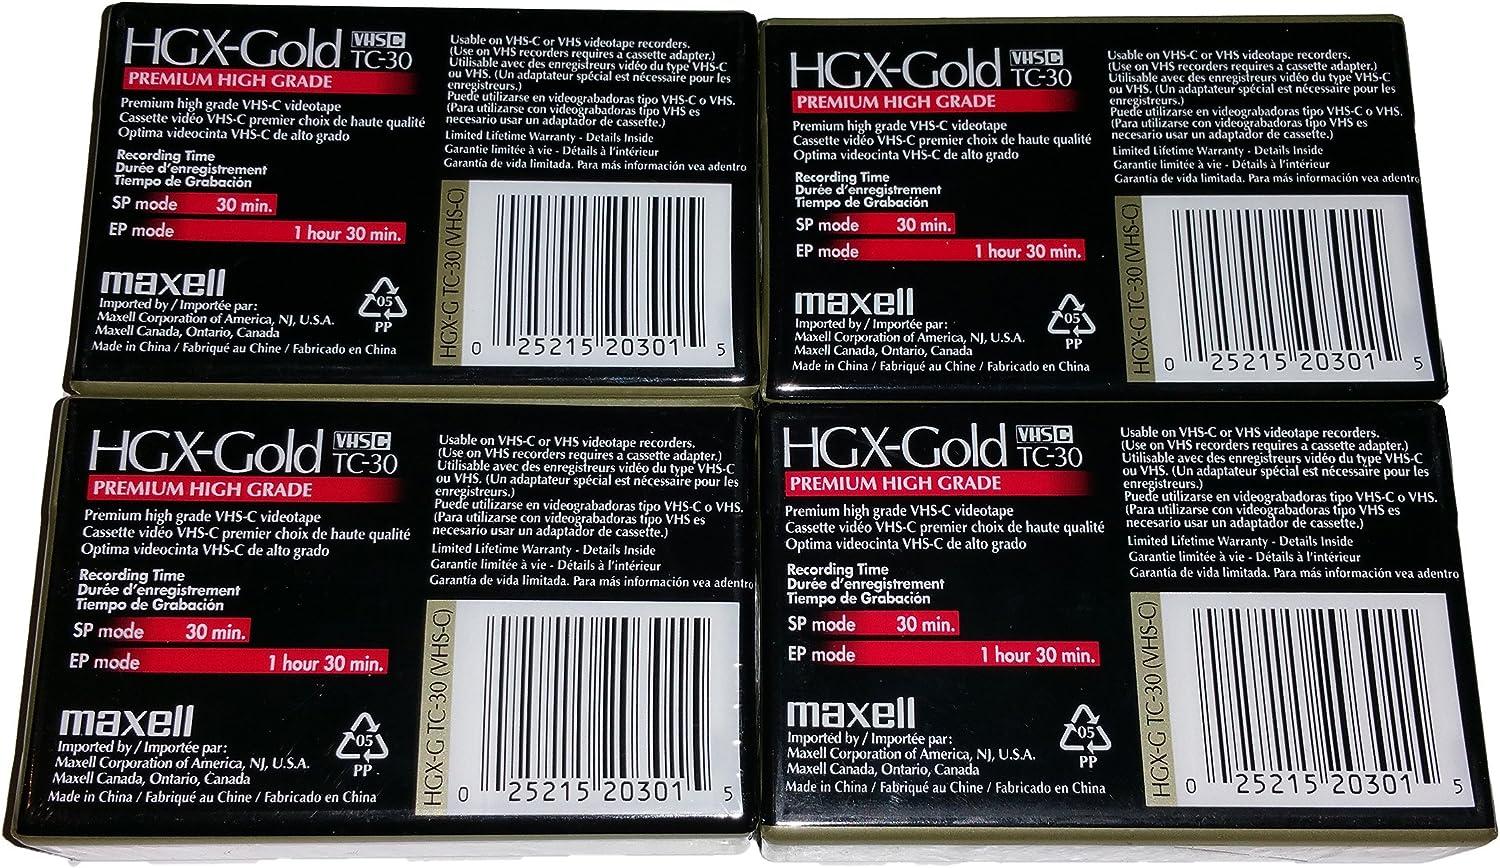 Maxell VHS-C TC-30 HGX Gold Blank Cassettes - Pack of 4 Cassettes